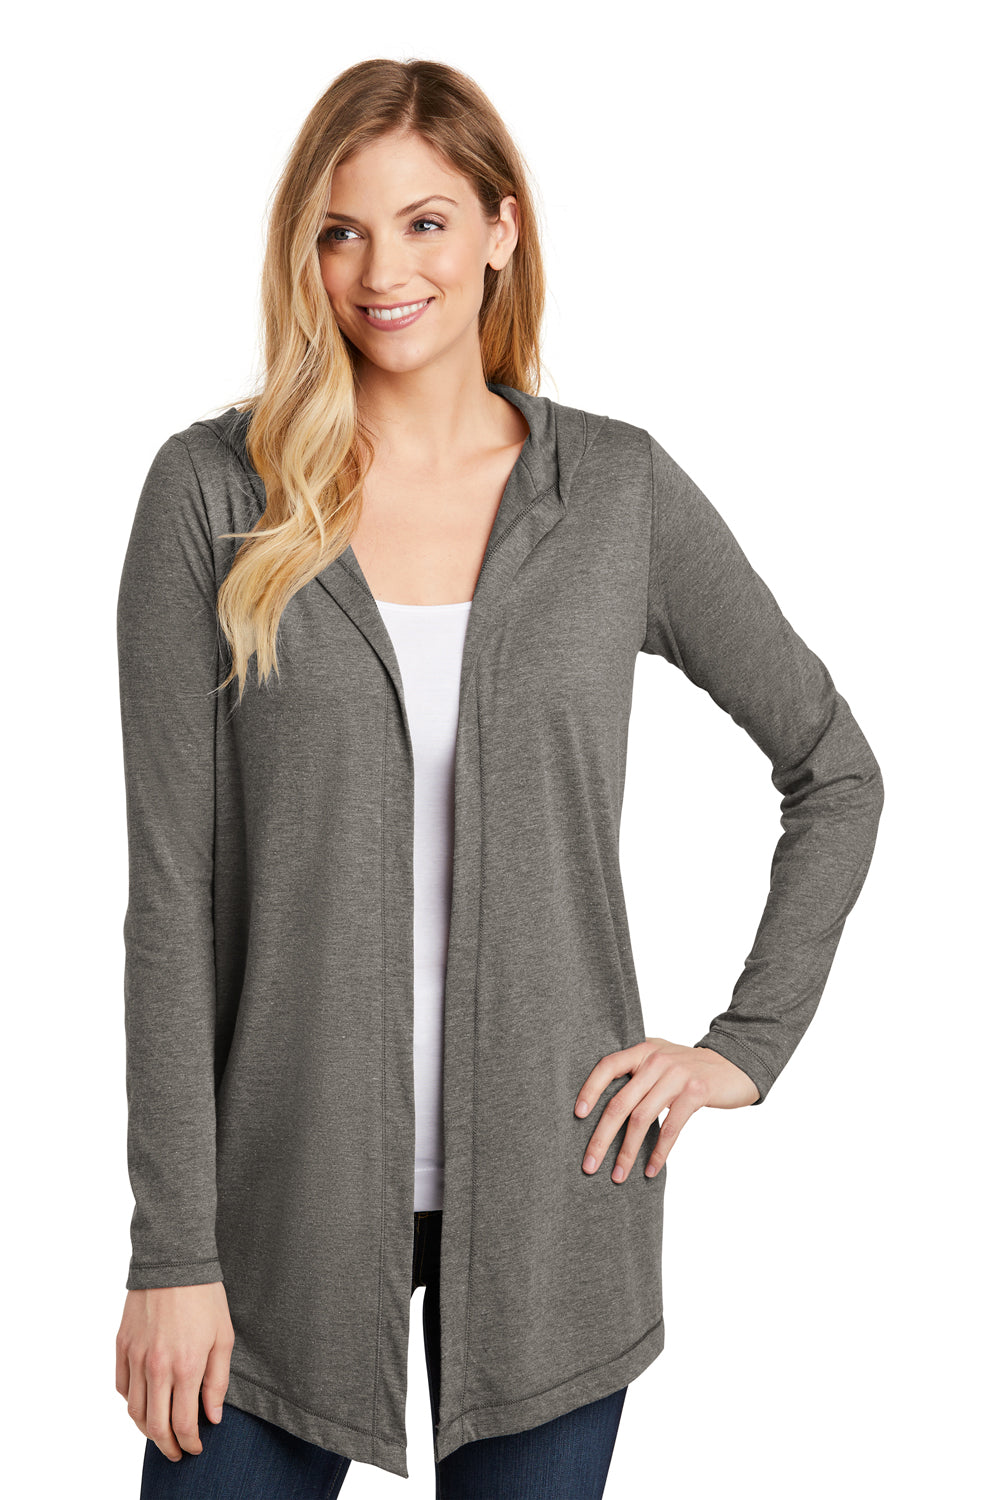 District DT156 Womens Perfect Tri Hooded Cardigan Sweater Grey Front